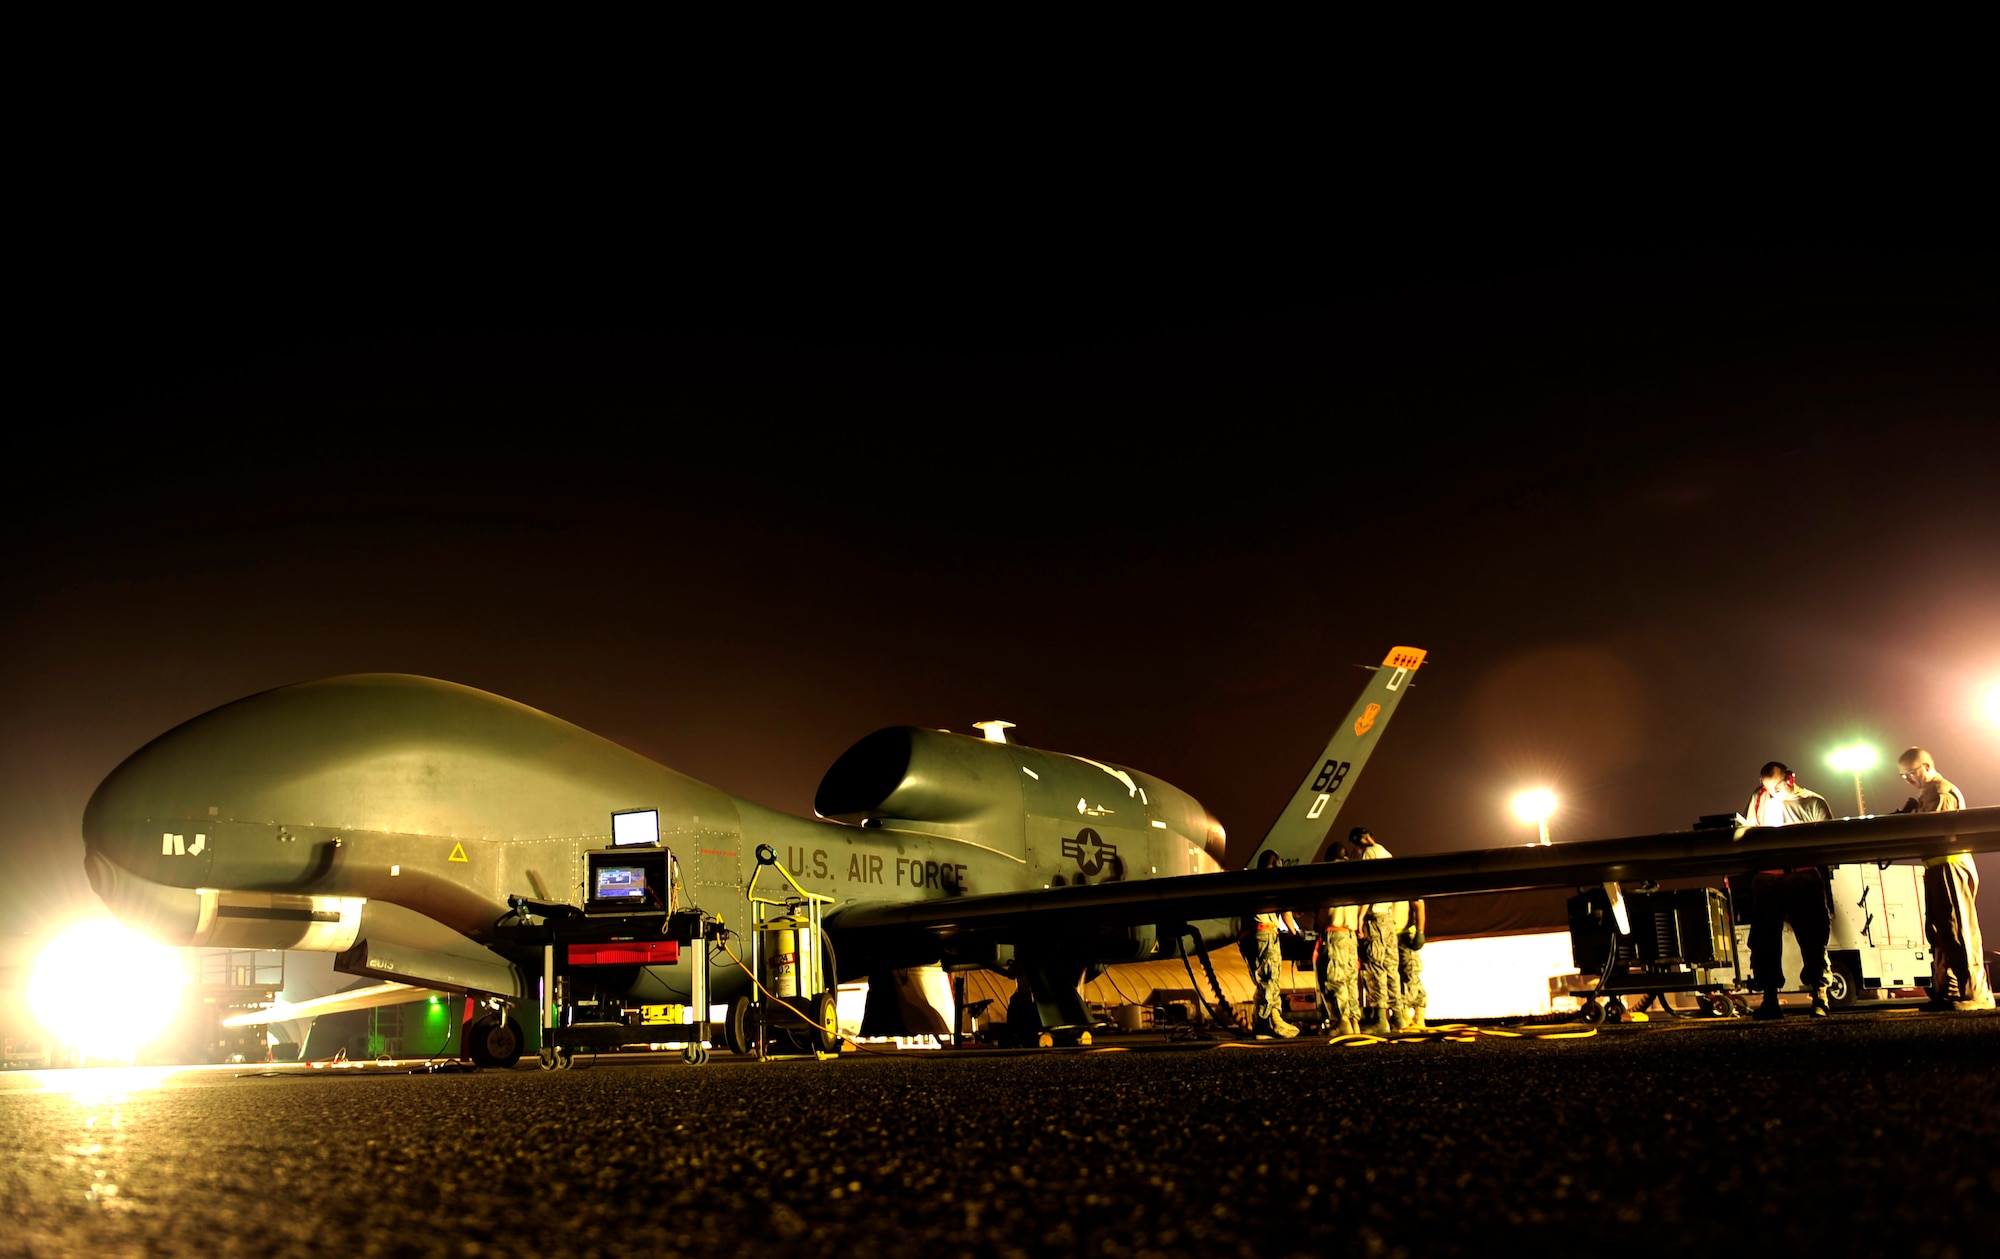 An RQ-4 Global Hawk gets prepared for a mission while deployed Nov. 23, 2010, at an air base in Southwest Asia. The RQ-4 and the Airmen are assigned to the 380th Expeditionary Operations Group. (U.S. Air Force photo/Staff Sgt. Andy M. Kin)